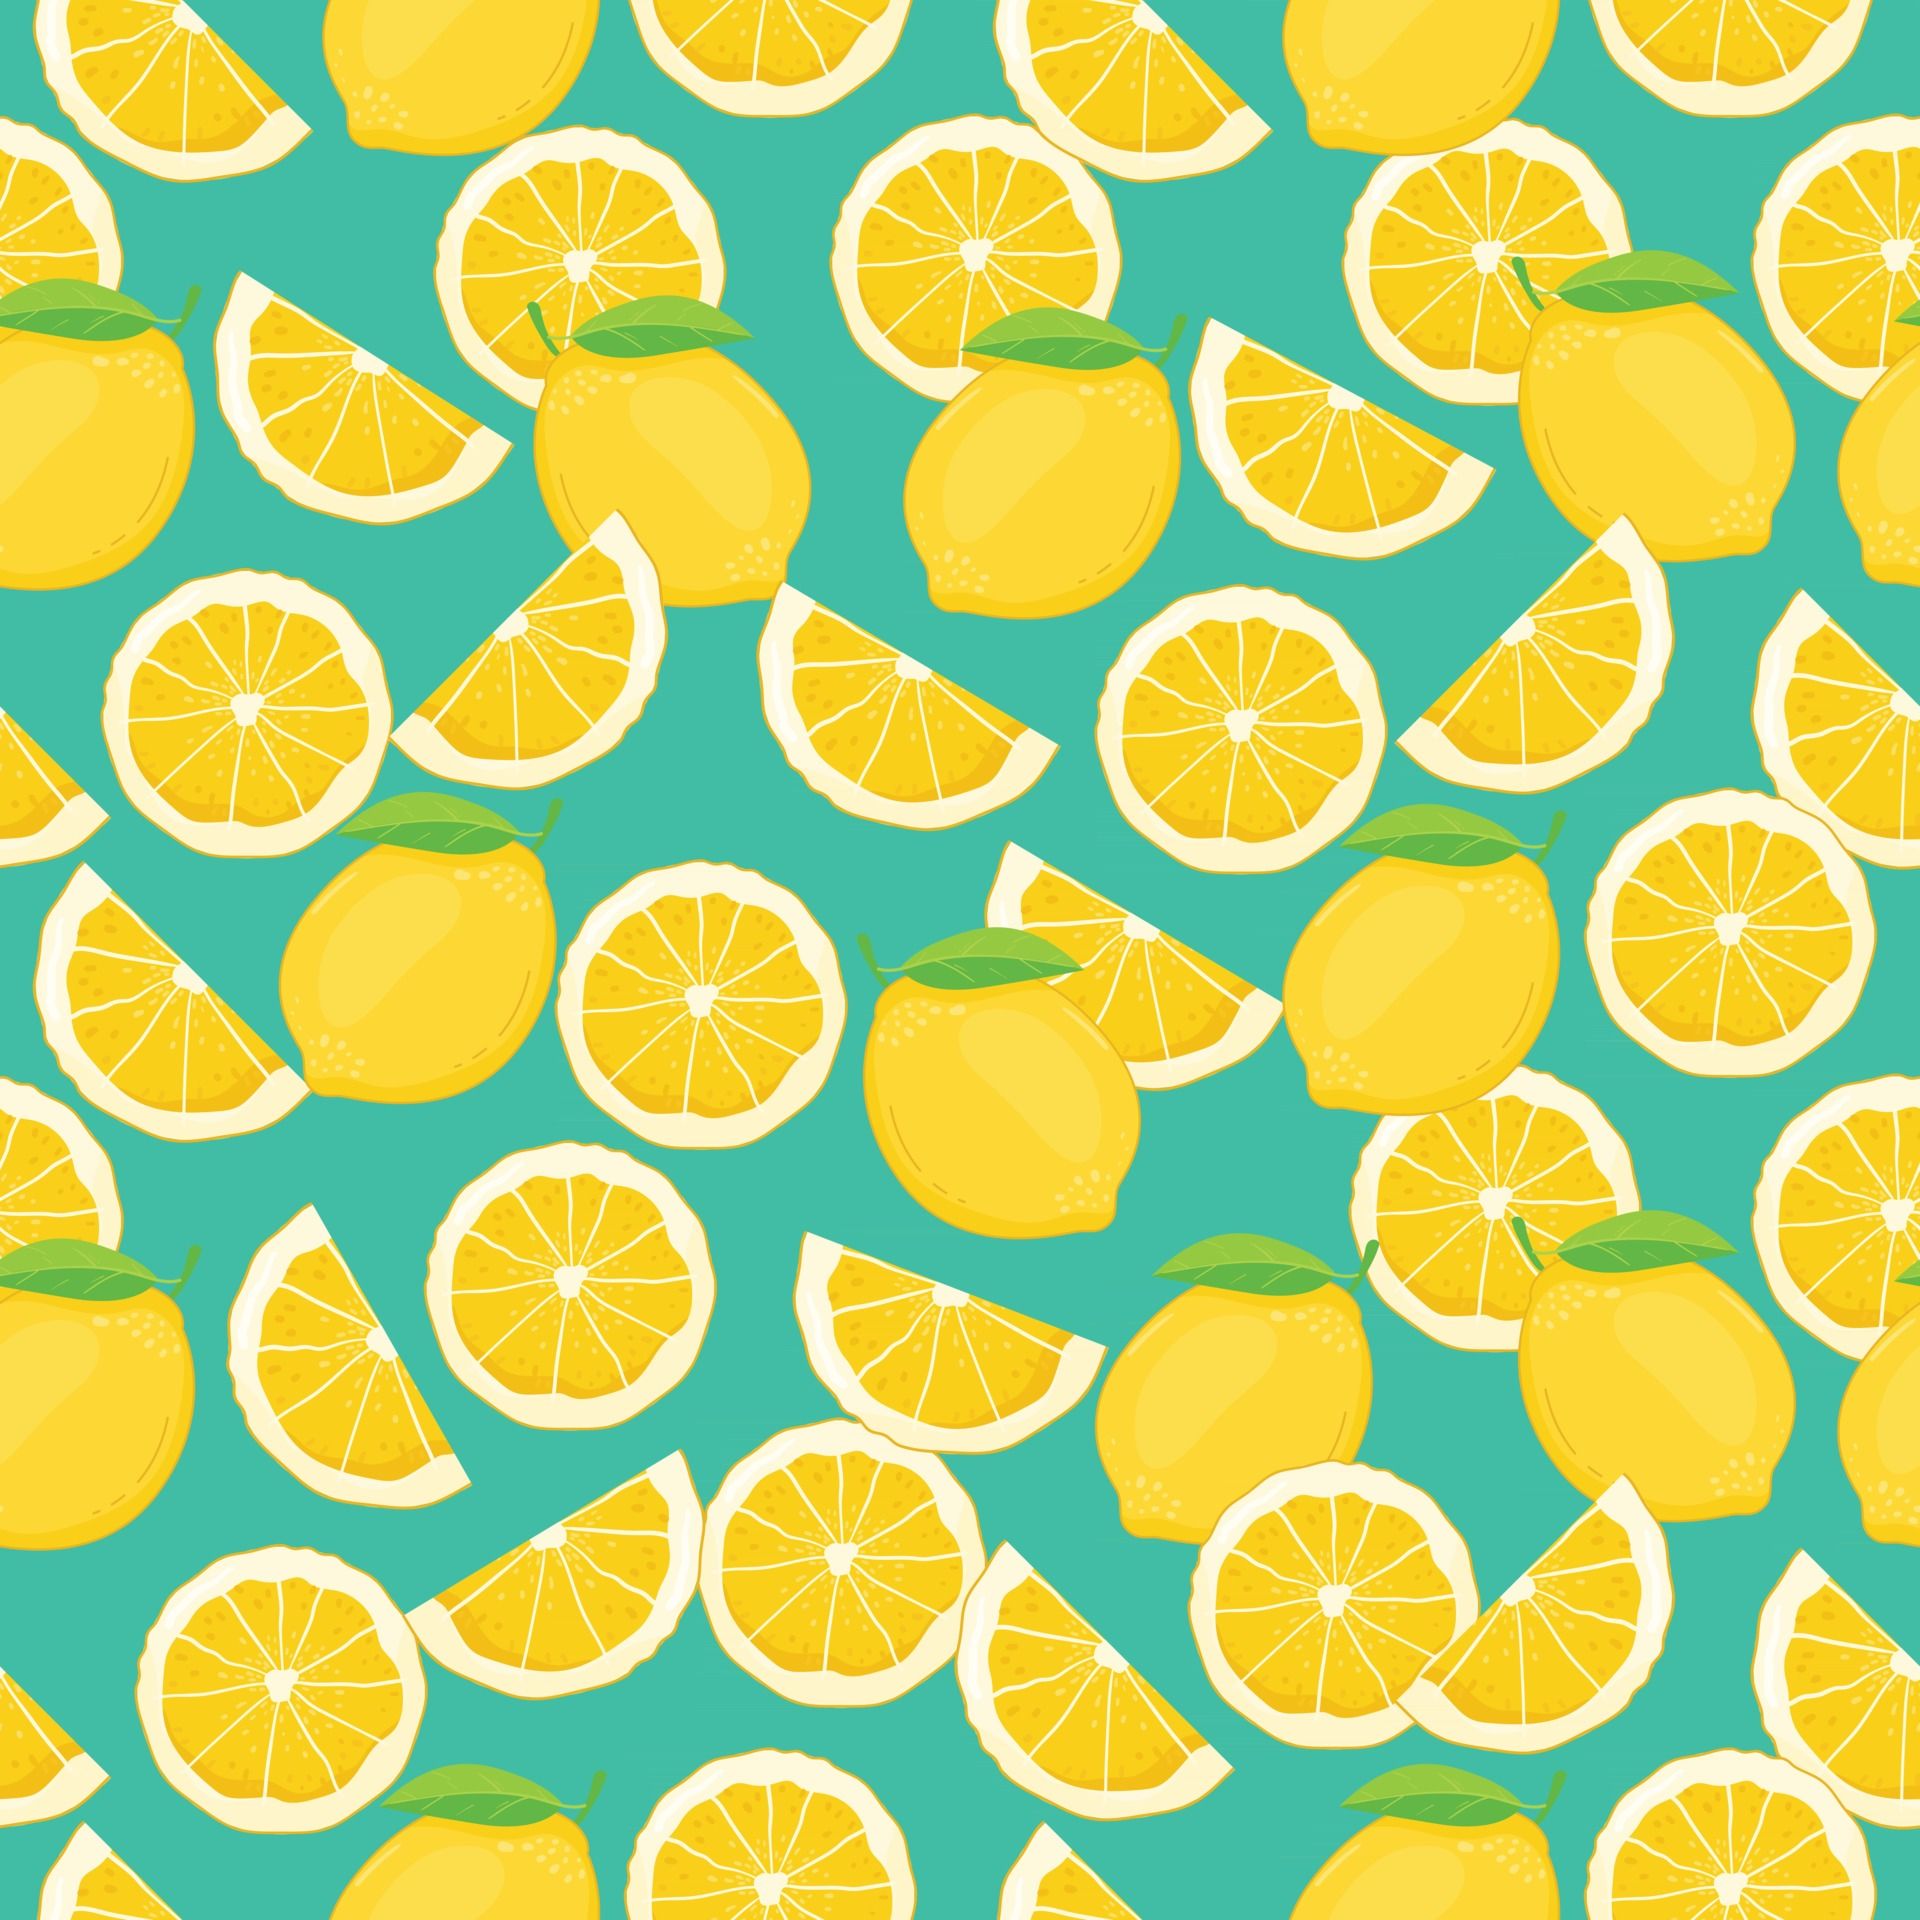 A pattern of lemons and slices on turquoise background - Lemon